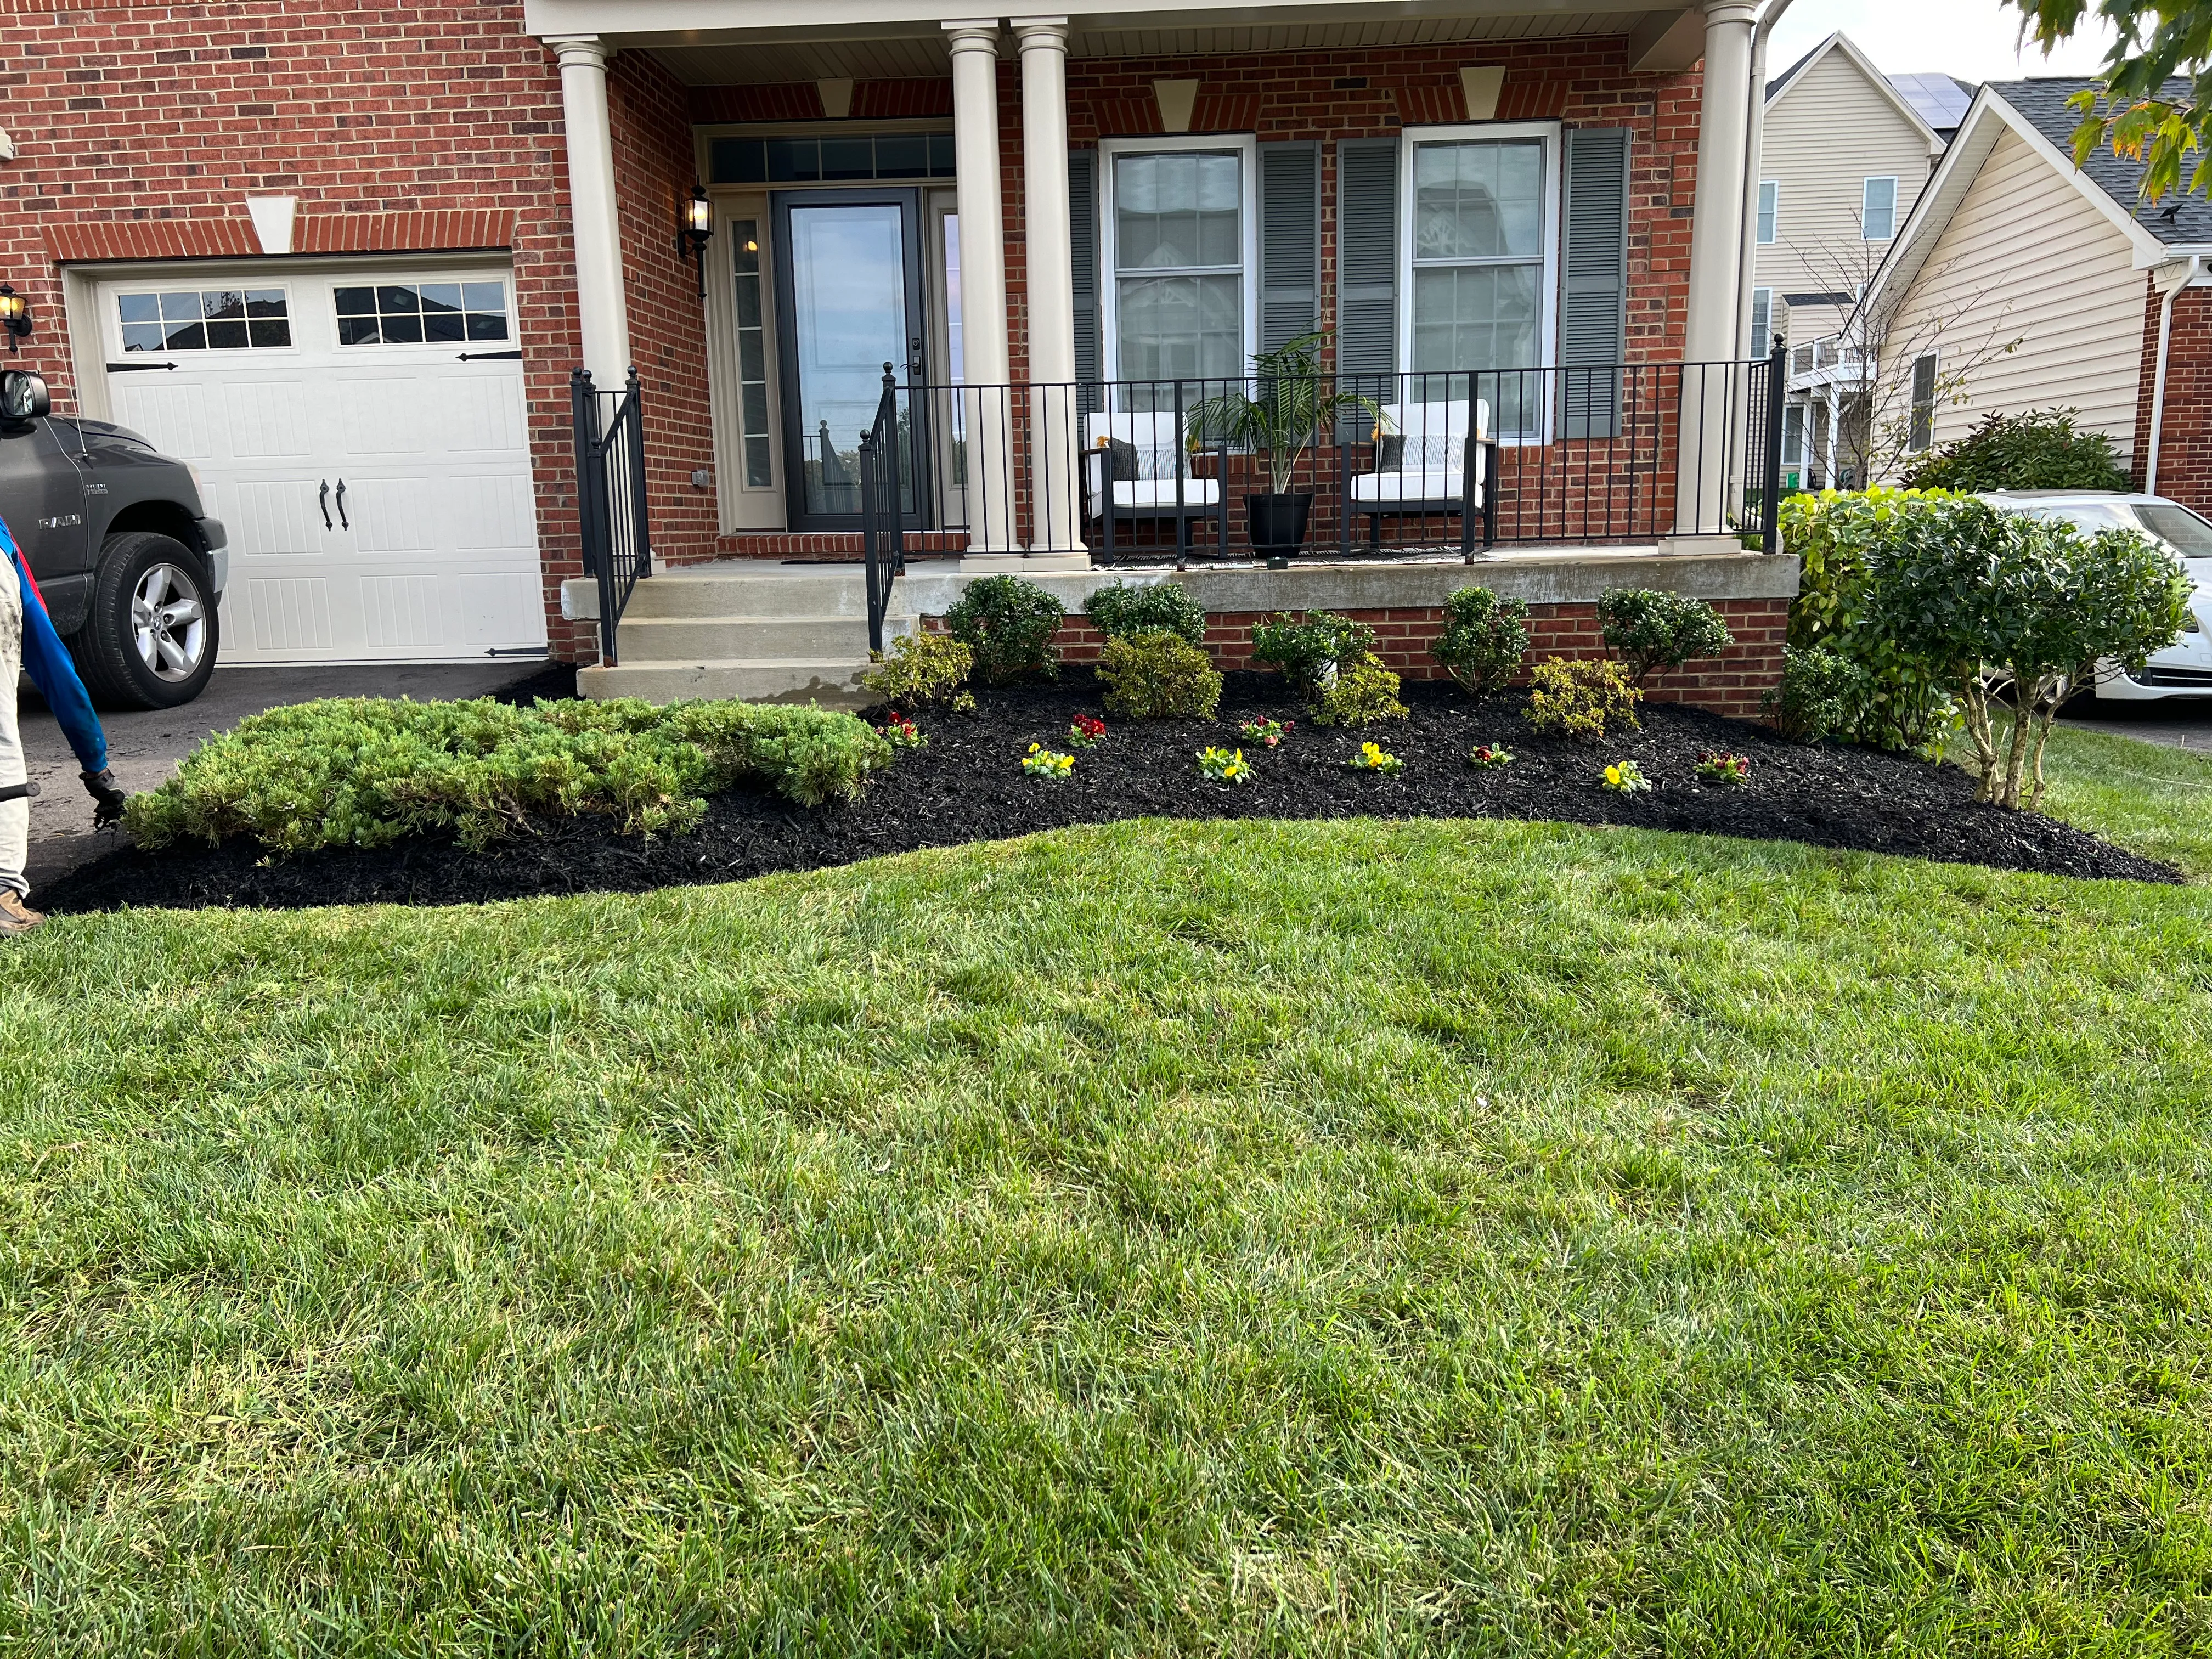 Mowing for A Landscaping King in Upper Marlboro , MD